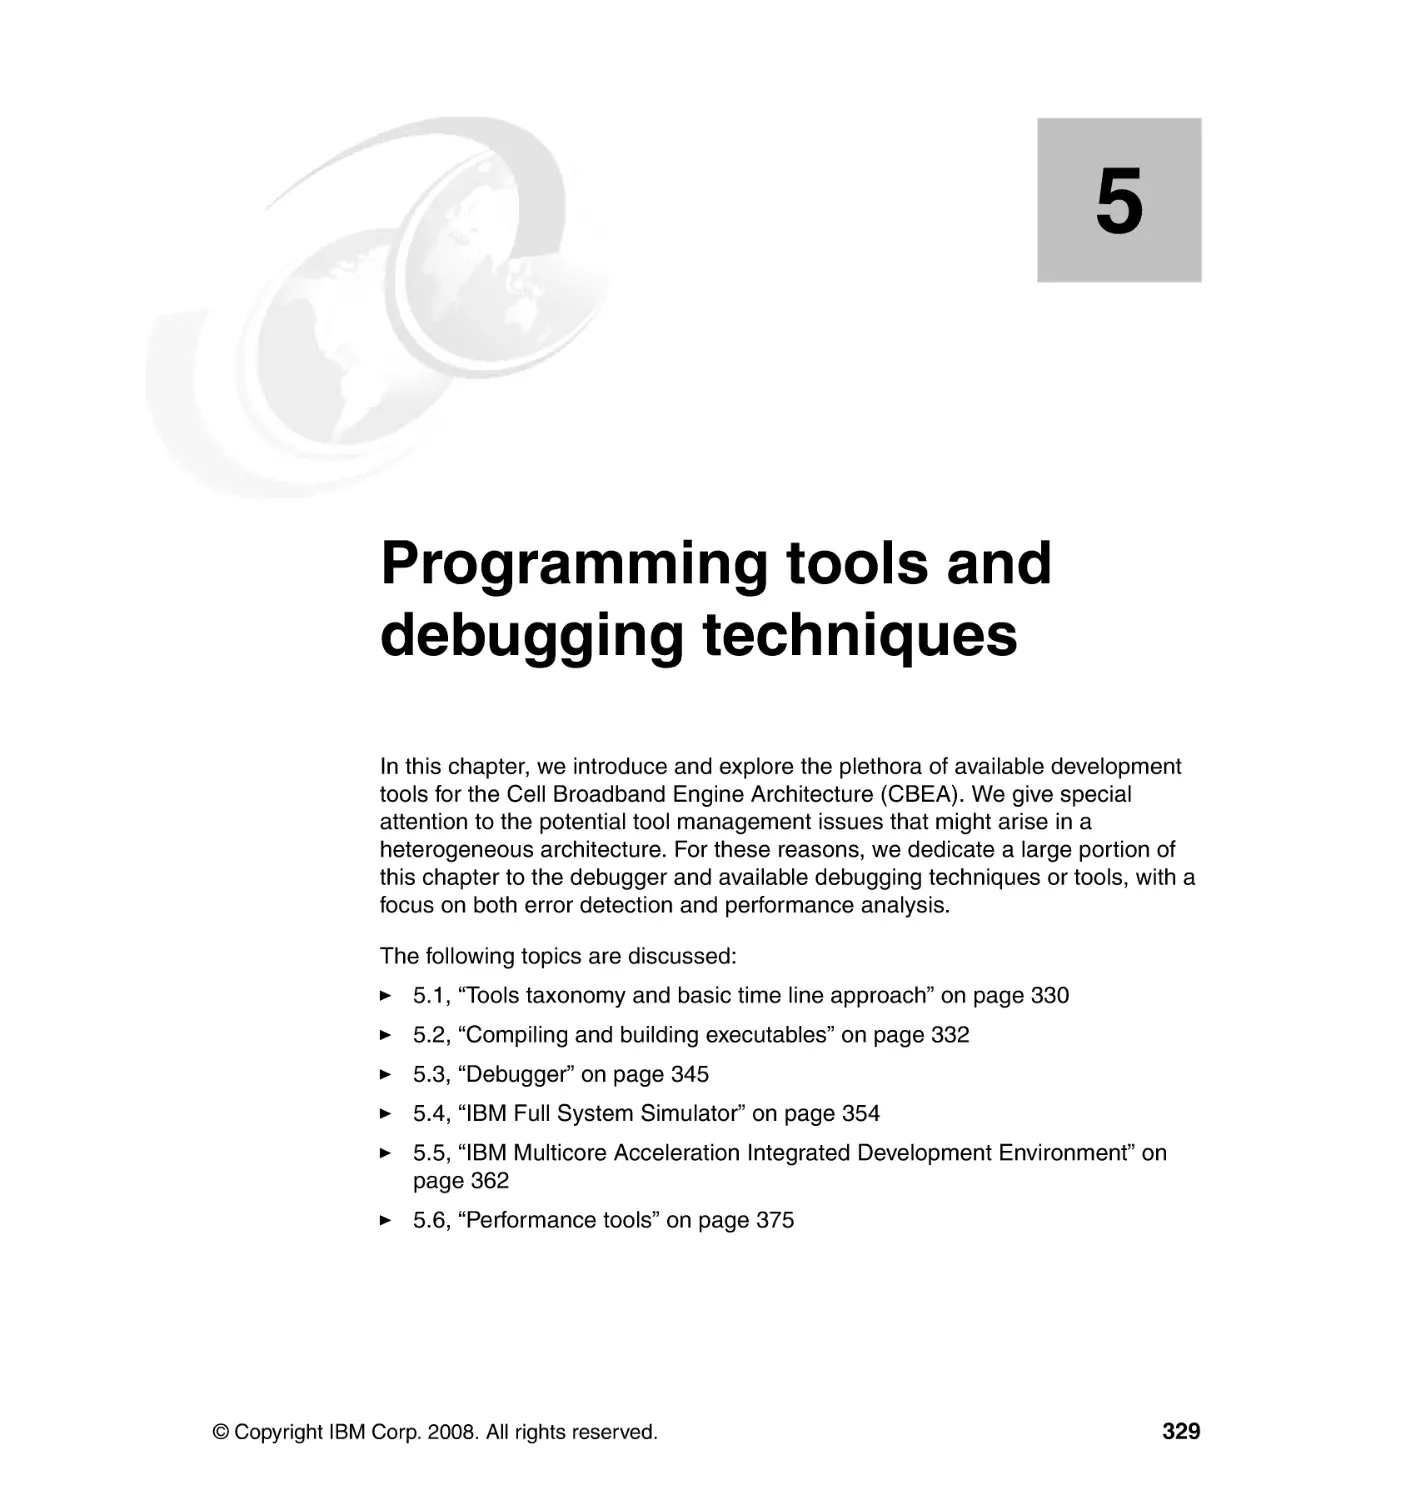 Chapter 5. Programming tools and debugging techniques